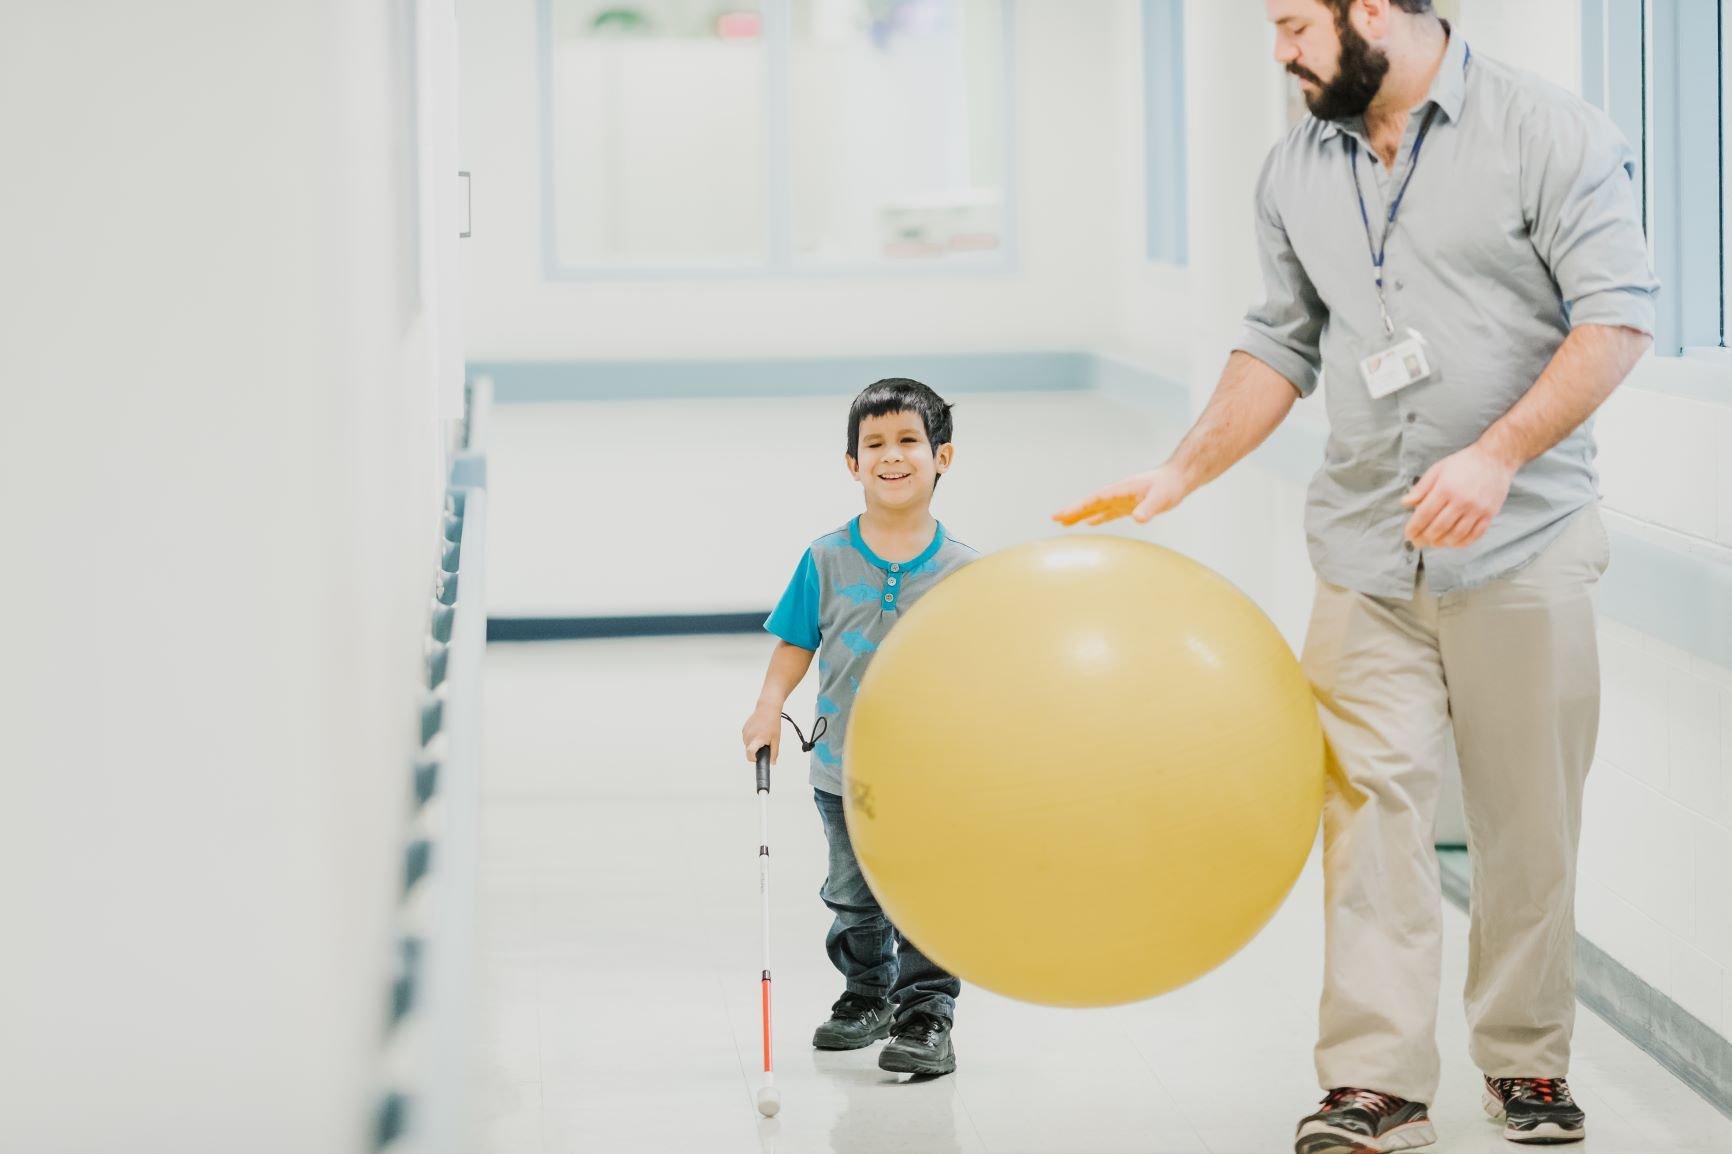 A little boy using a white cane walks down a hallway following a man bouncing a large yellow ball in front of him.